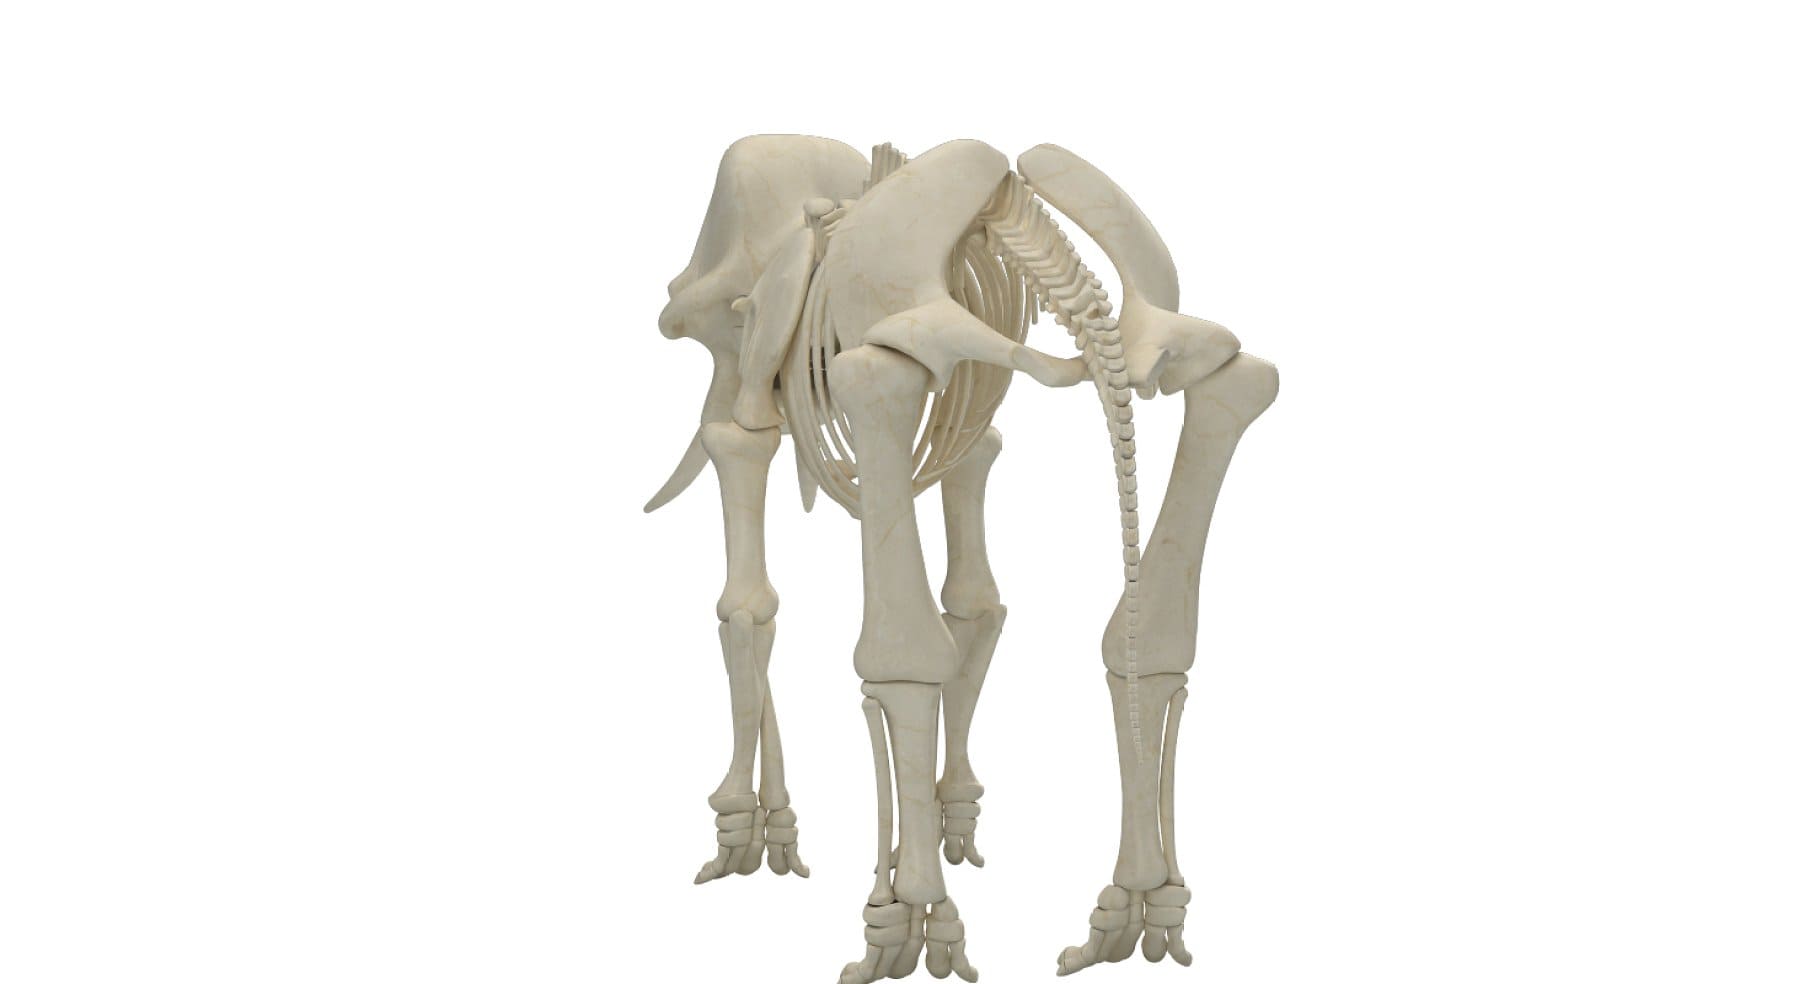 An image of the hip bones of an elephant.